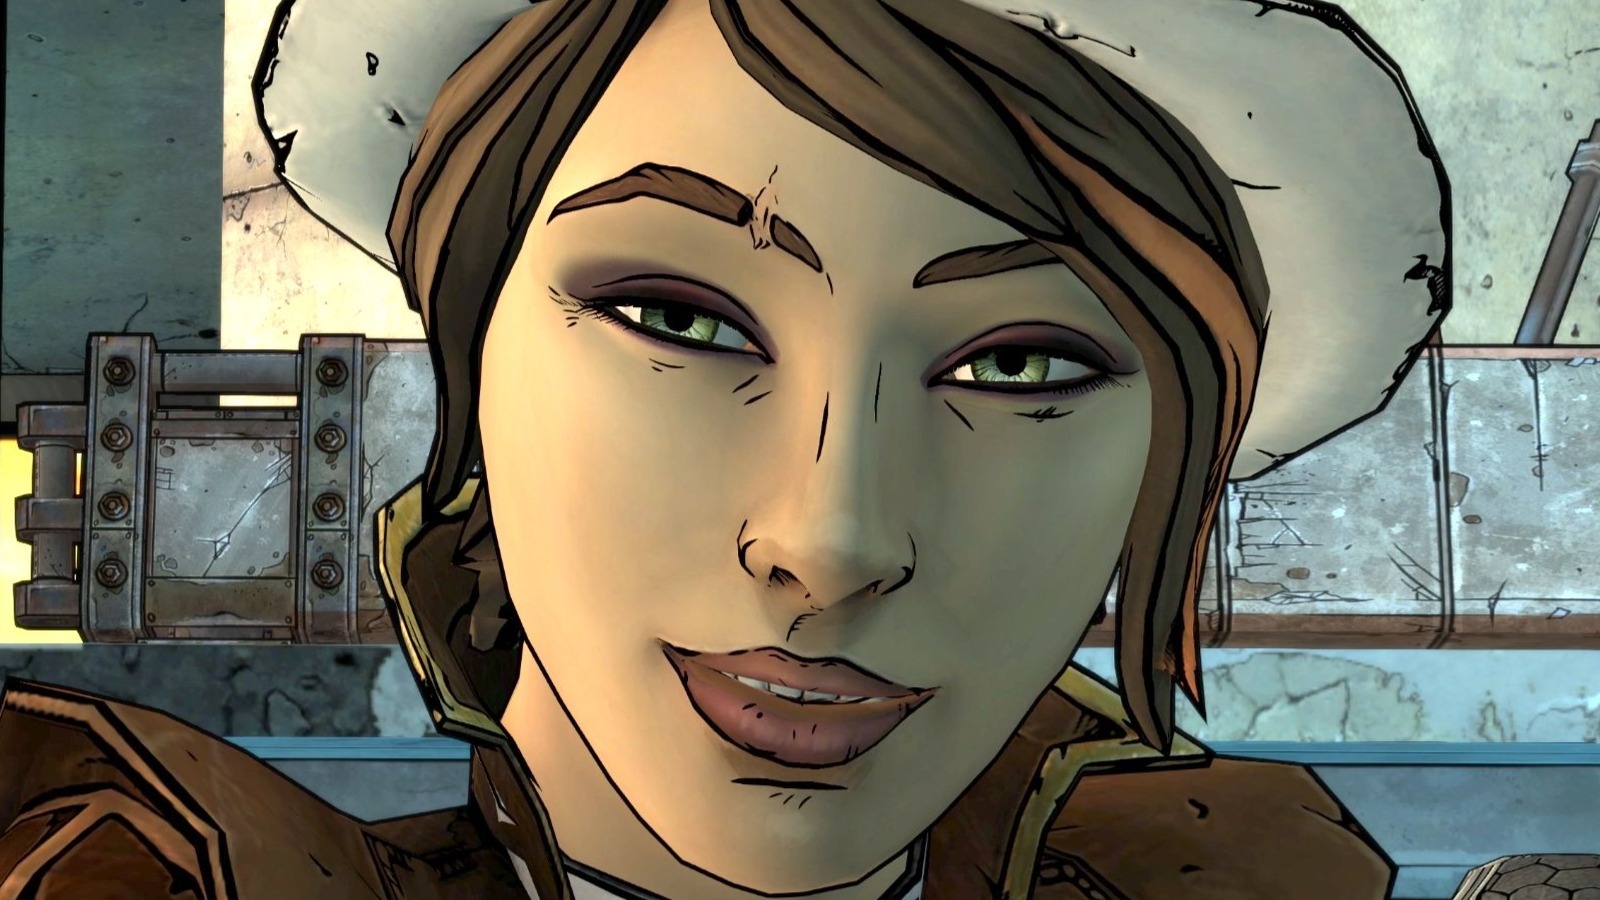 The New Borderlands Game Announcement Has Fans Divided